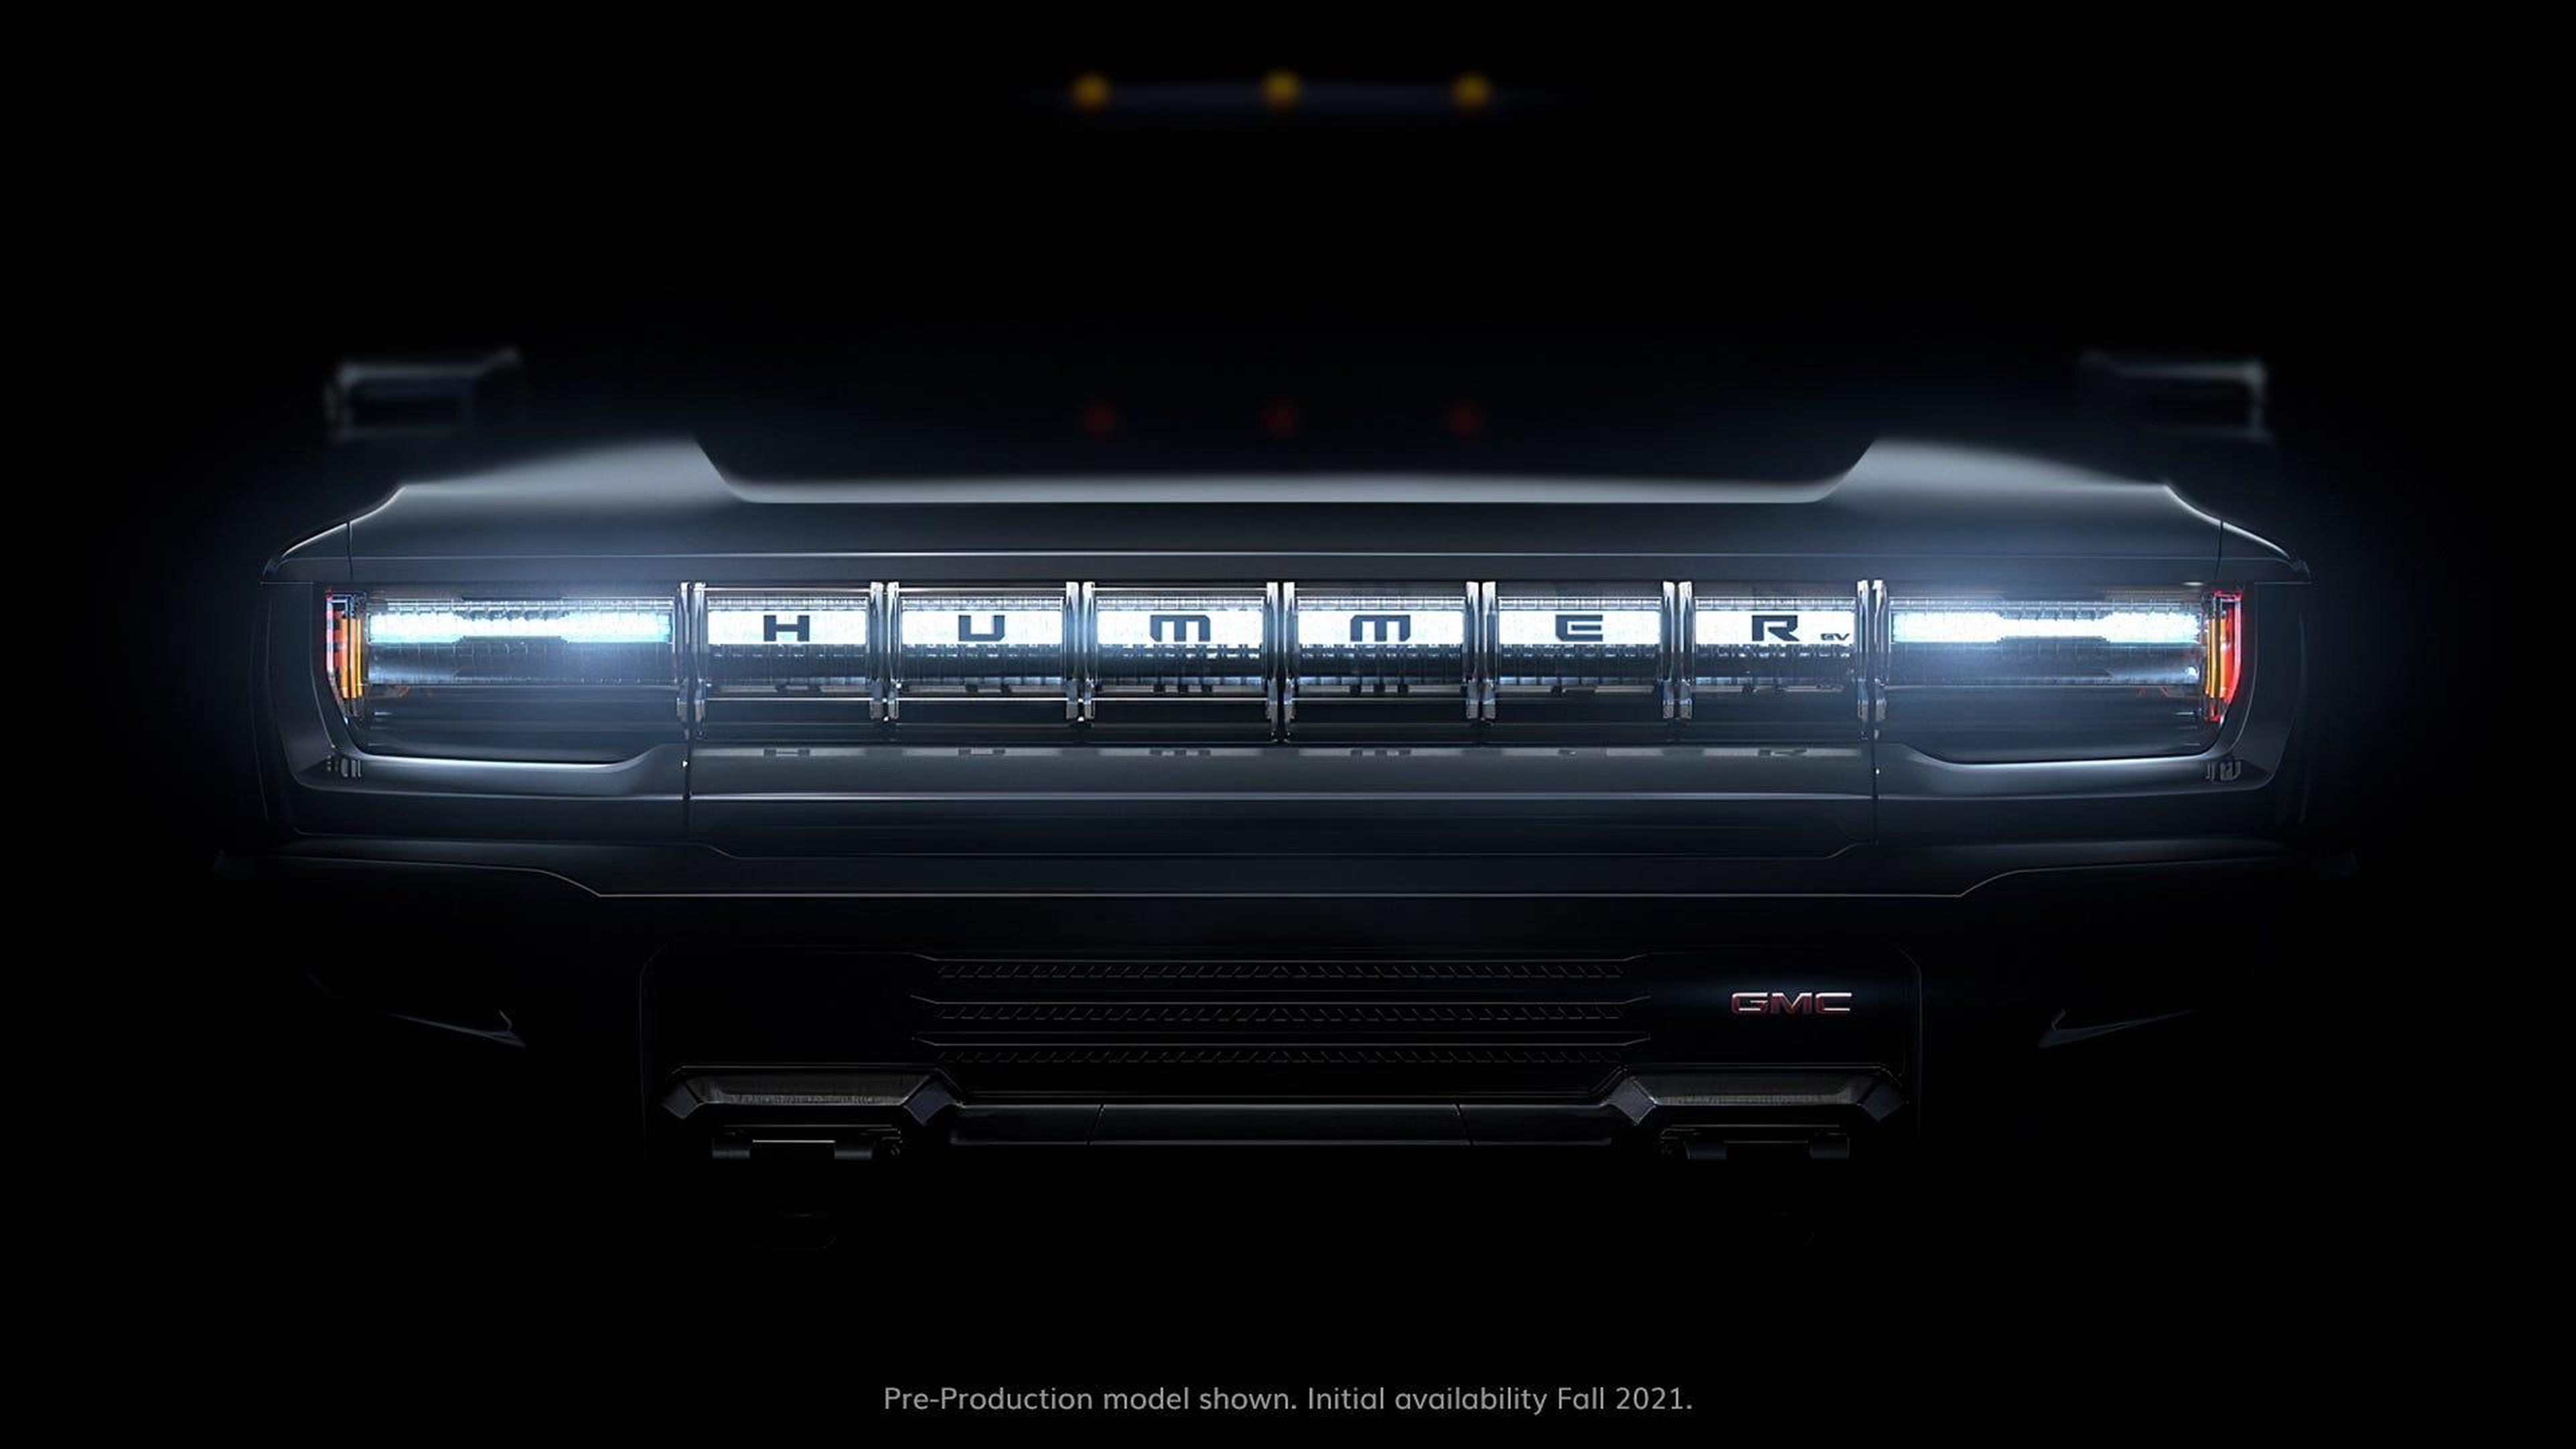 The teaser photo for the new GMC Hummer. GMC